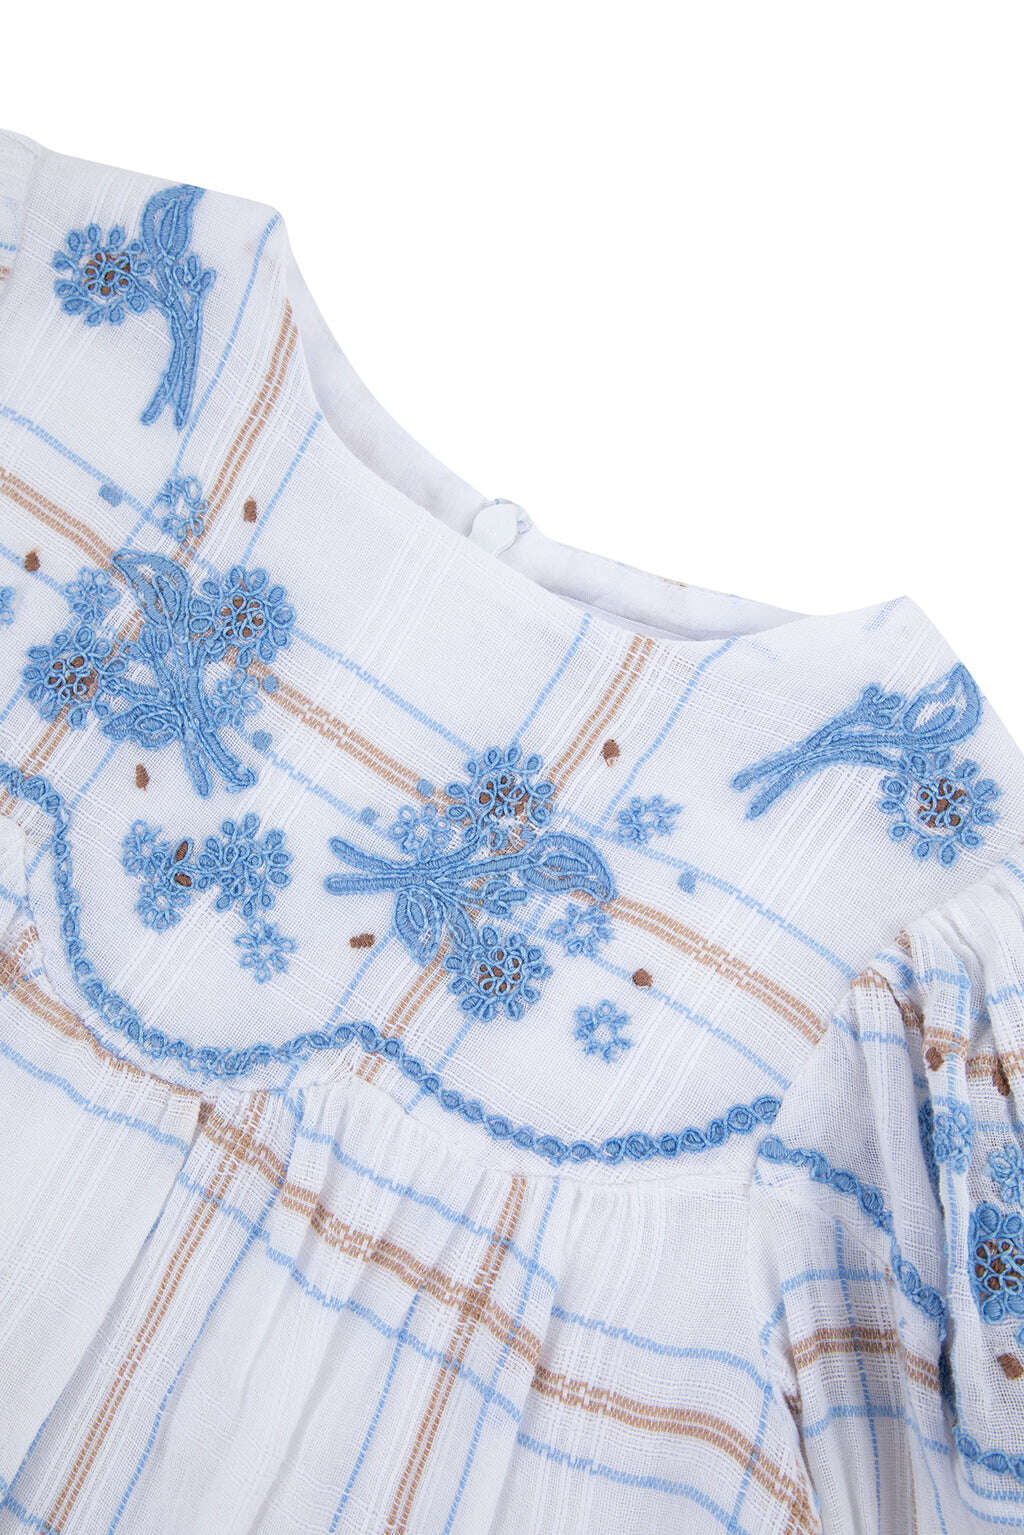 Blouse - White Check embroidery